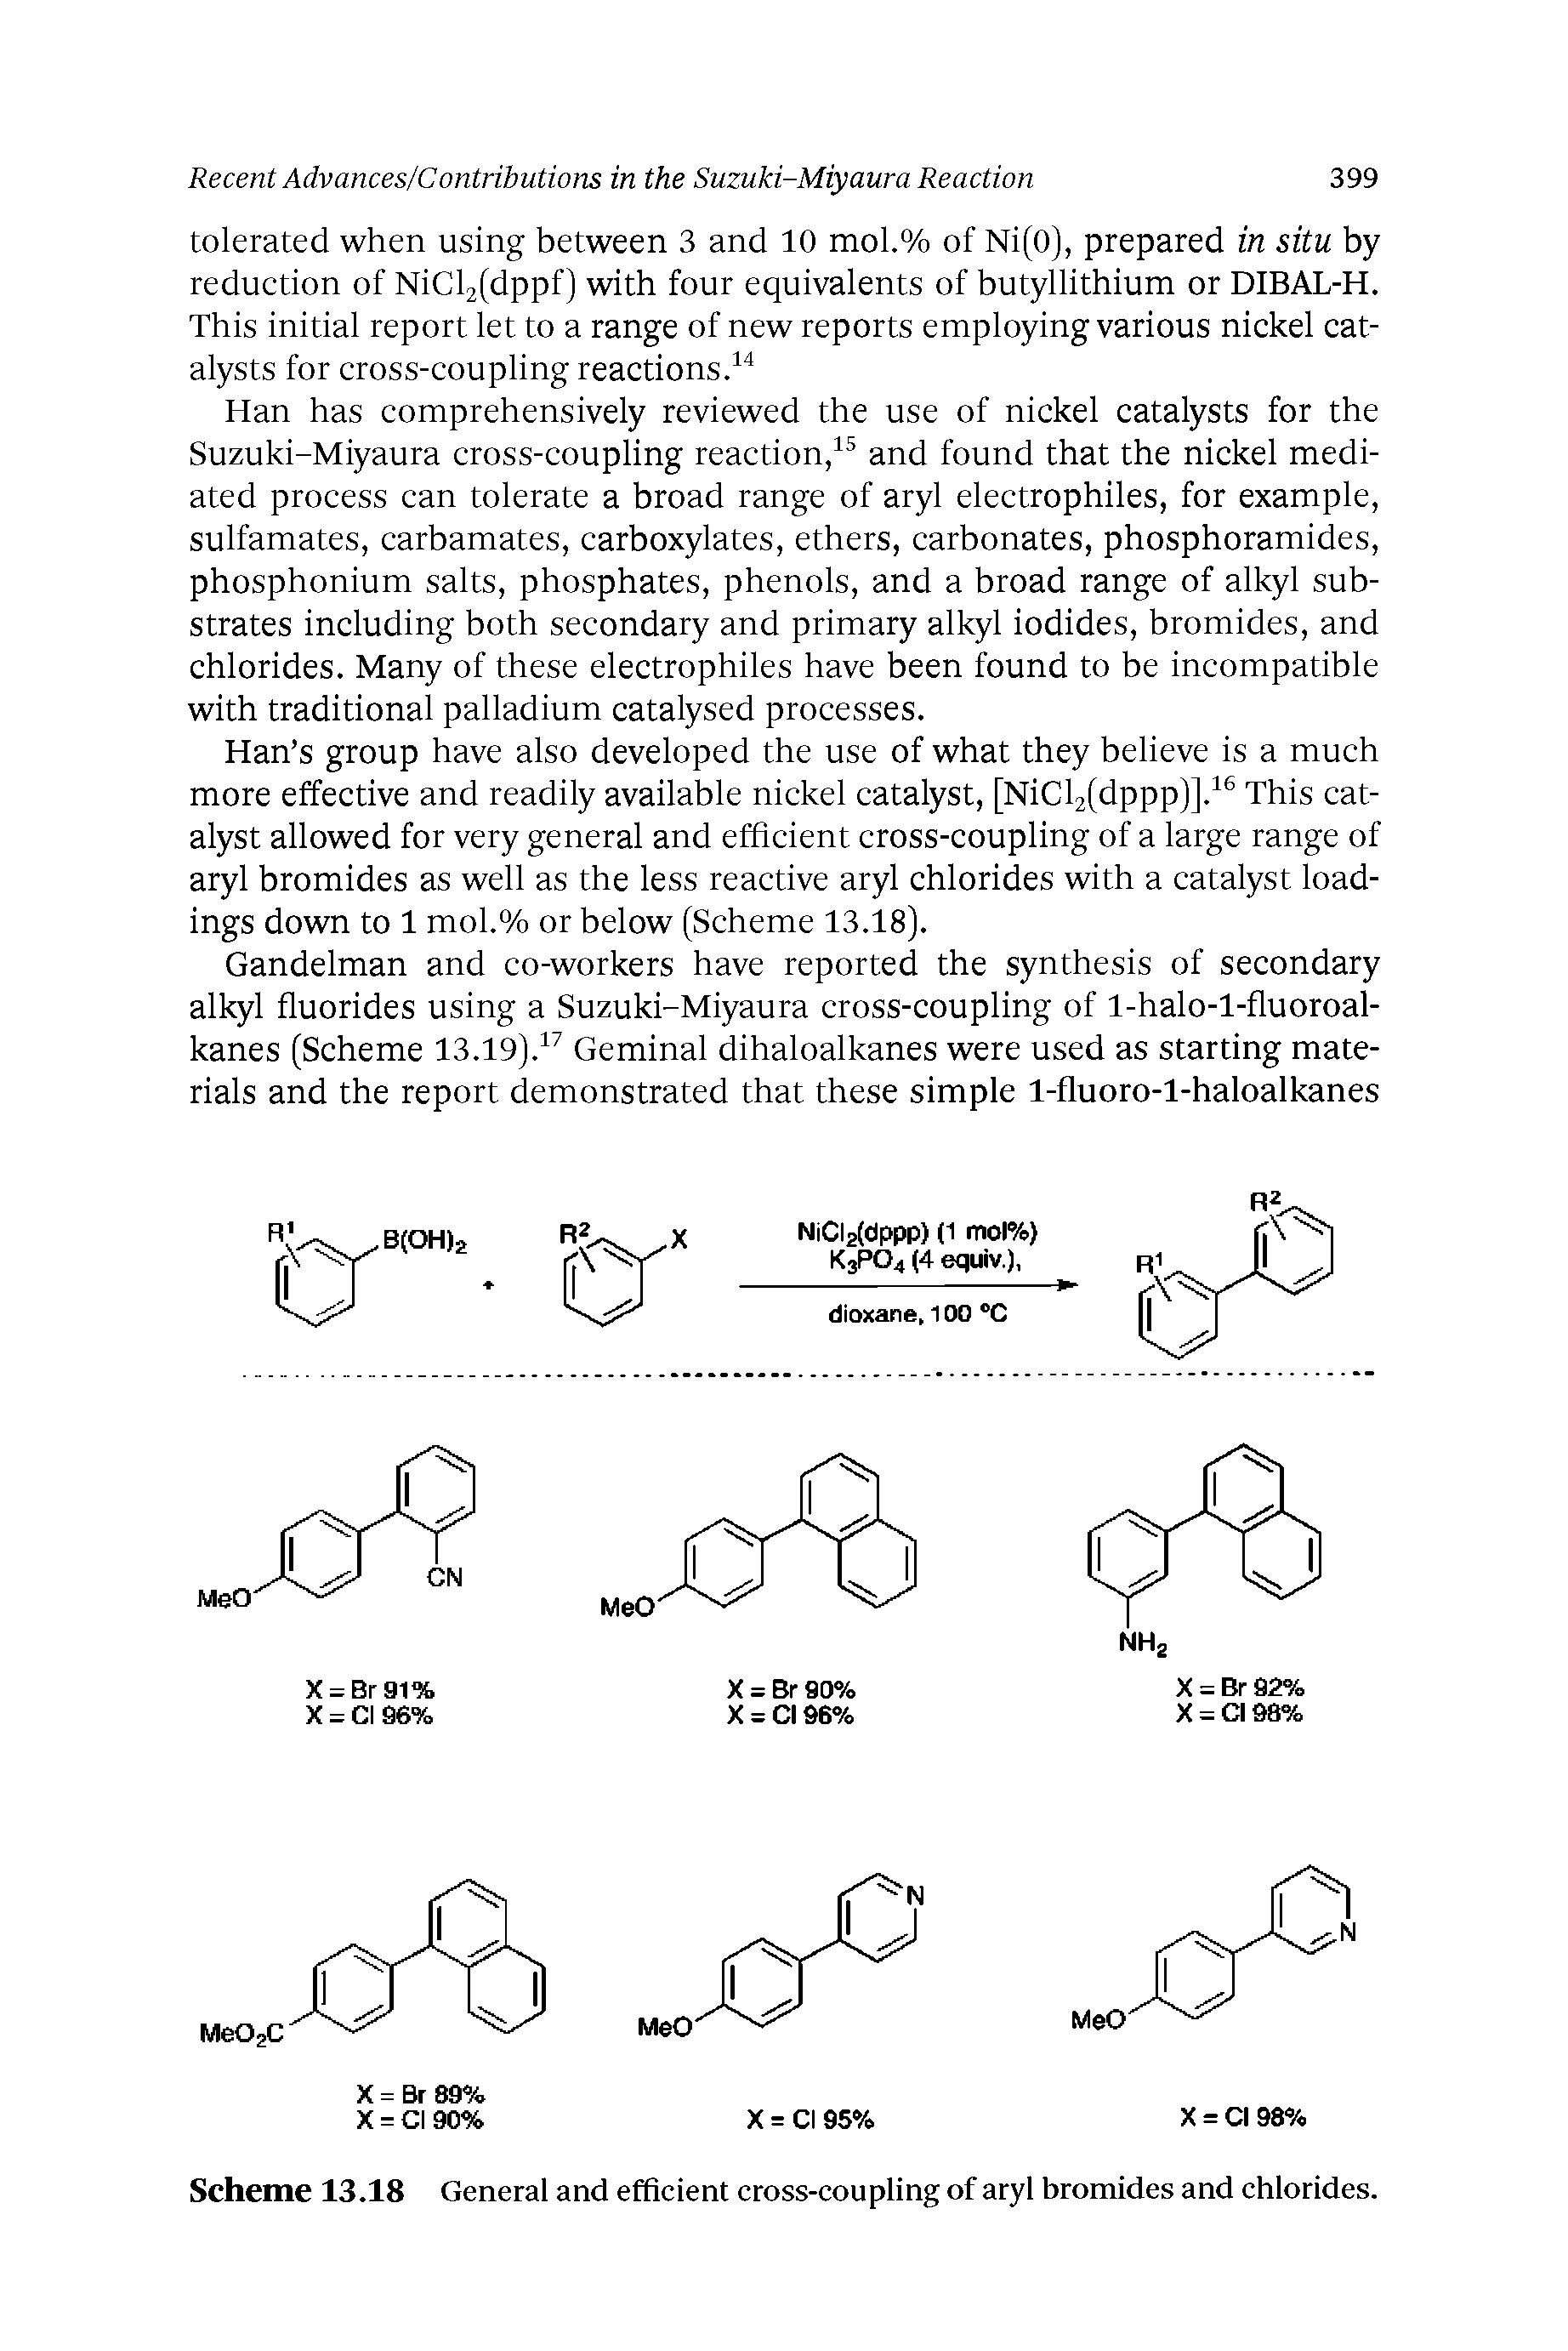 Scheme 13.18 General and efficient cross-coupling of aryl bromides and chlorides.